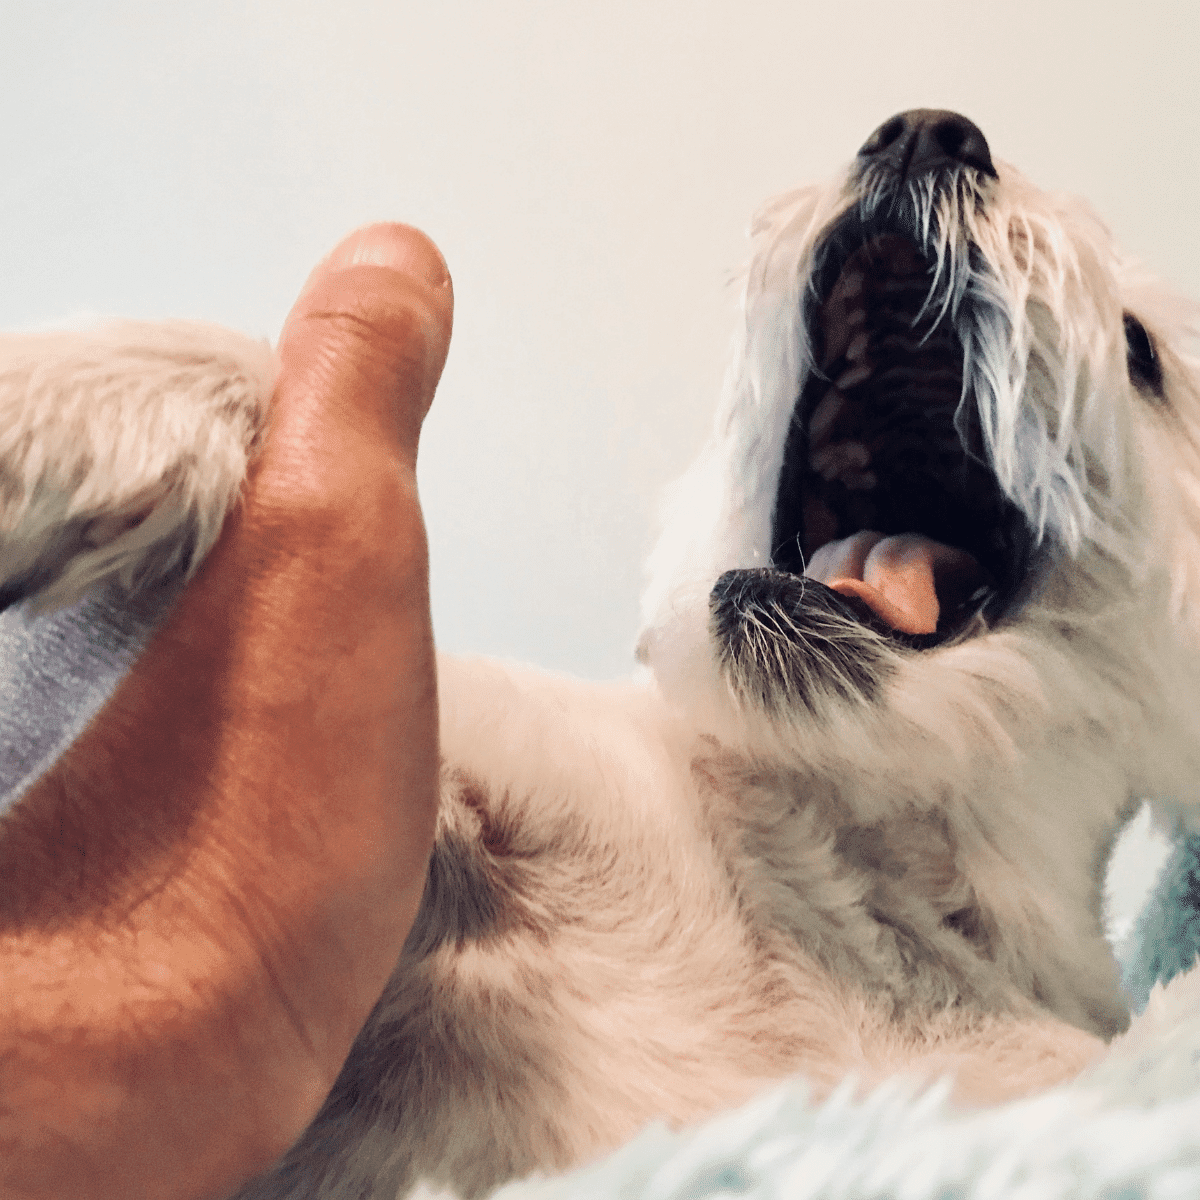 cream colored medium size dog holding paw up to human in a close up picture and seemingly crying out in pain